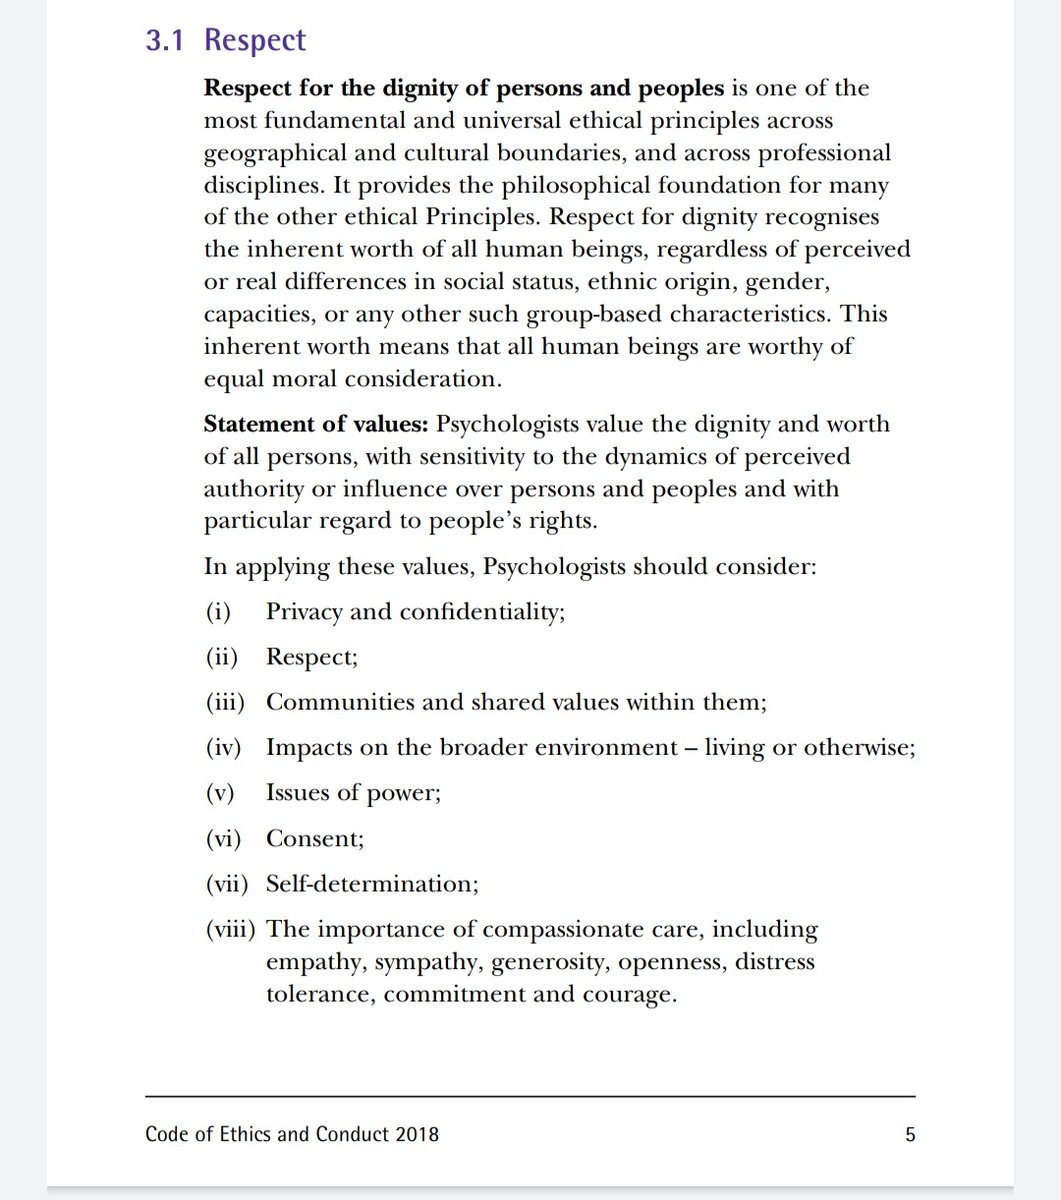 The British Psychological Society has a code of ethics which lays out "the precise forms of ethical conduct and behaviour which The Society expects of its members" https://www.bps.org.uk/news-and-policy/bps-code-ethics-and-conduct